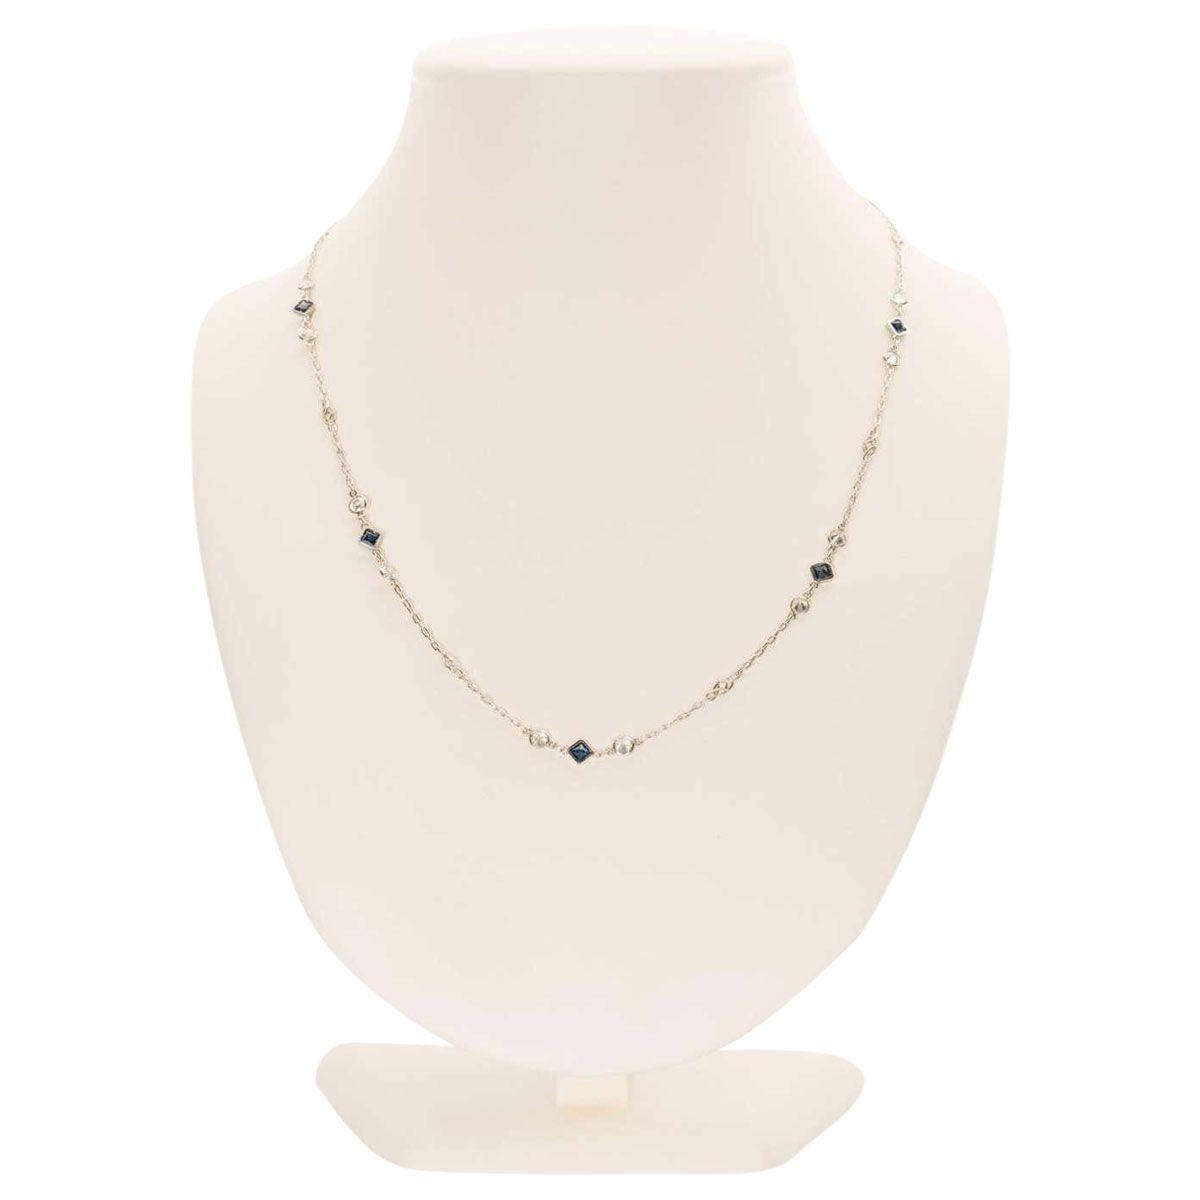 Perfect for every occasion, this subtle yet timeless necklace is set with 14 bezel set brilliant cut white diamonds weighing approximately 1.40 carats alongside 7 square cut blue sapphires weighing approximately 1.10 carats. The chain is a fine